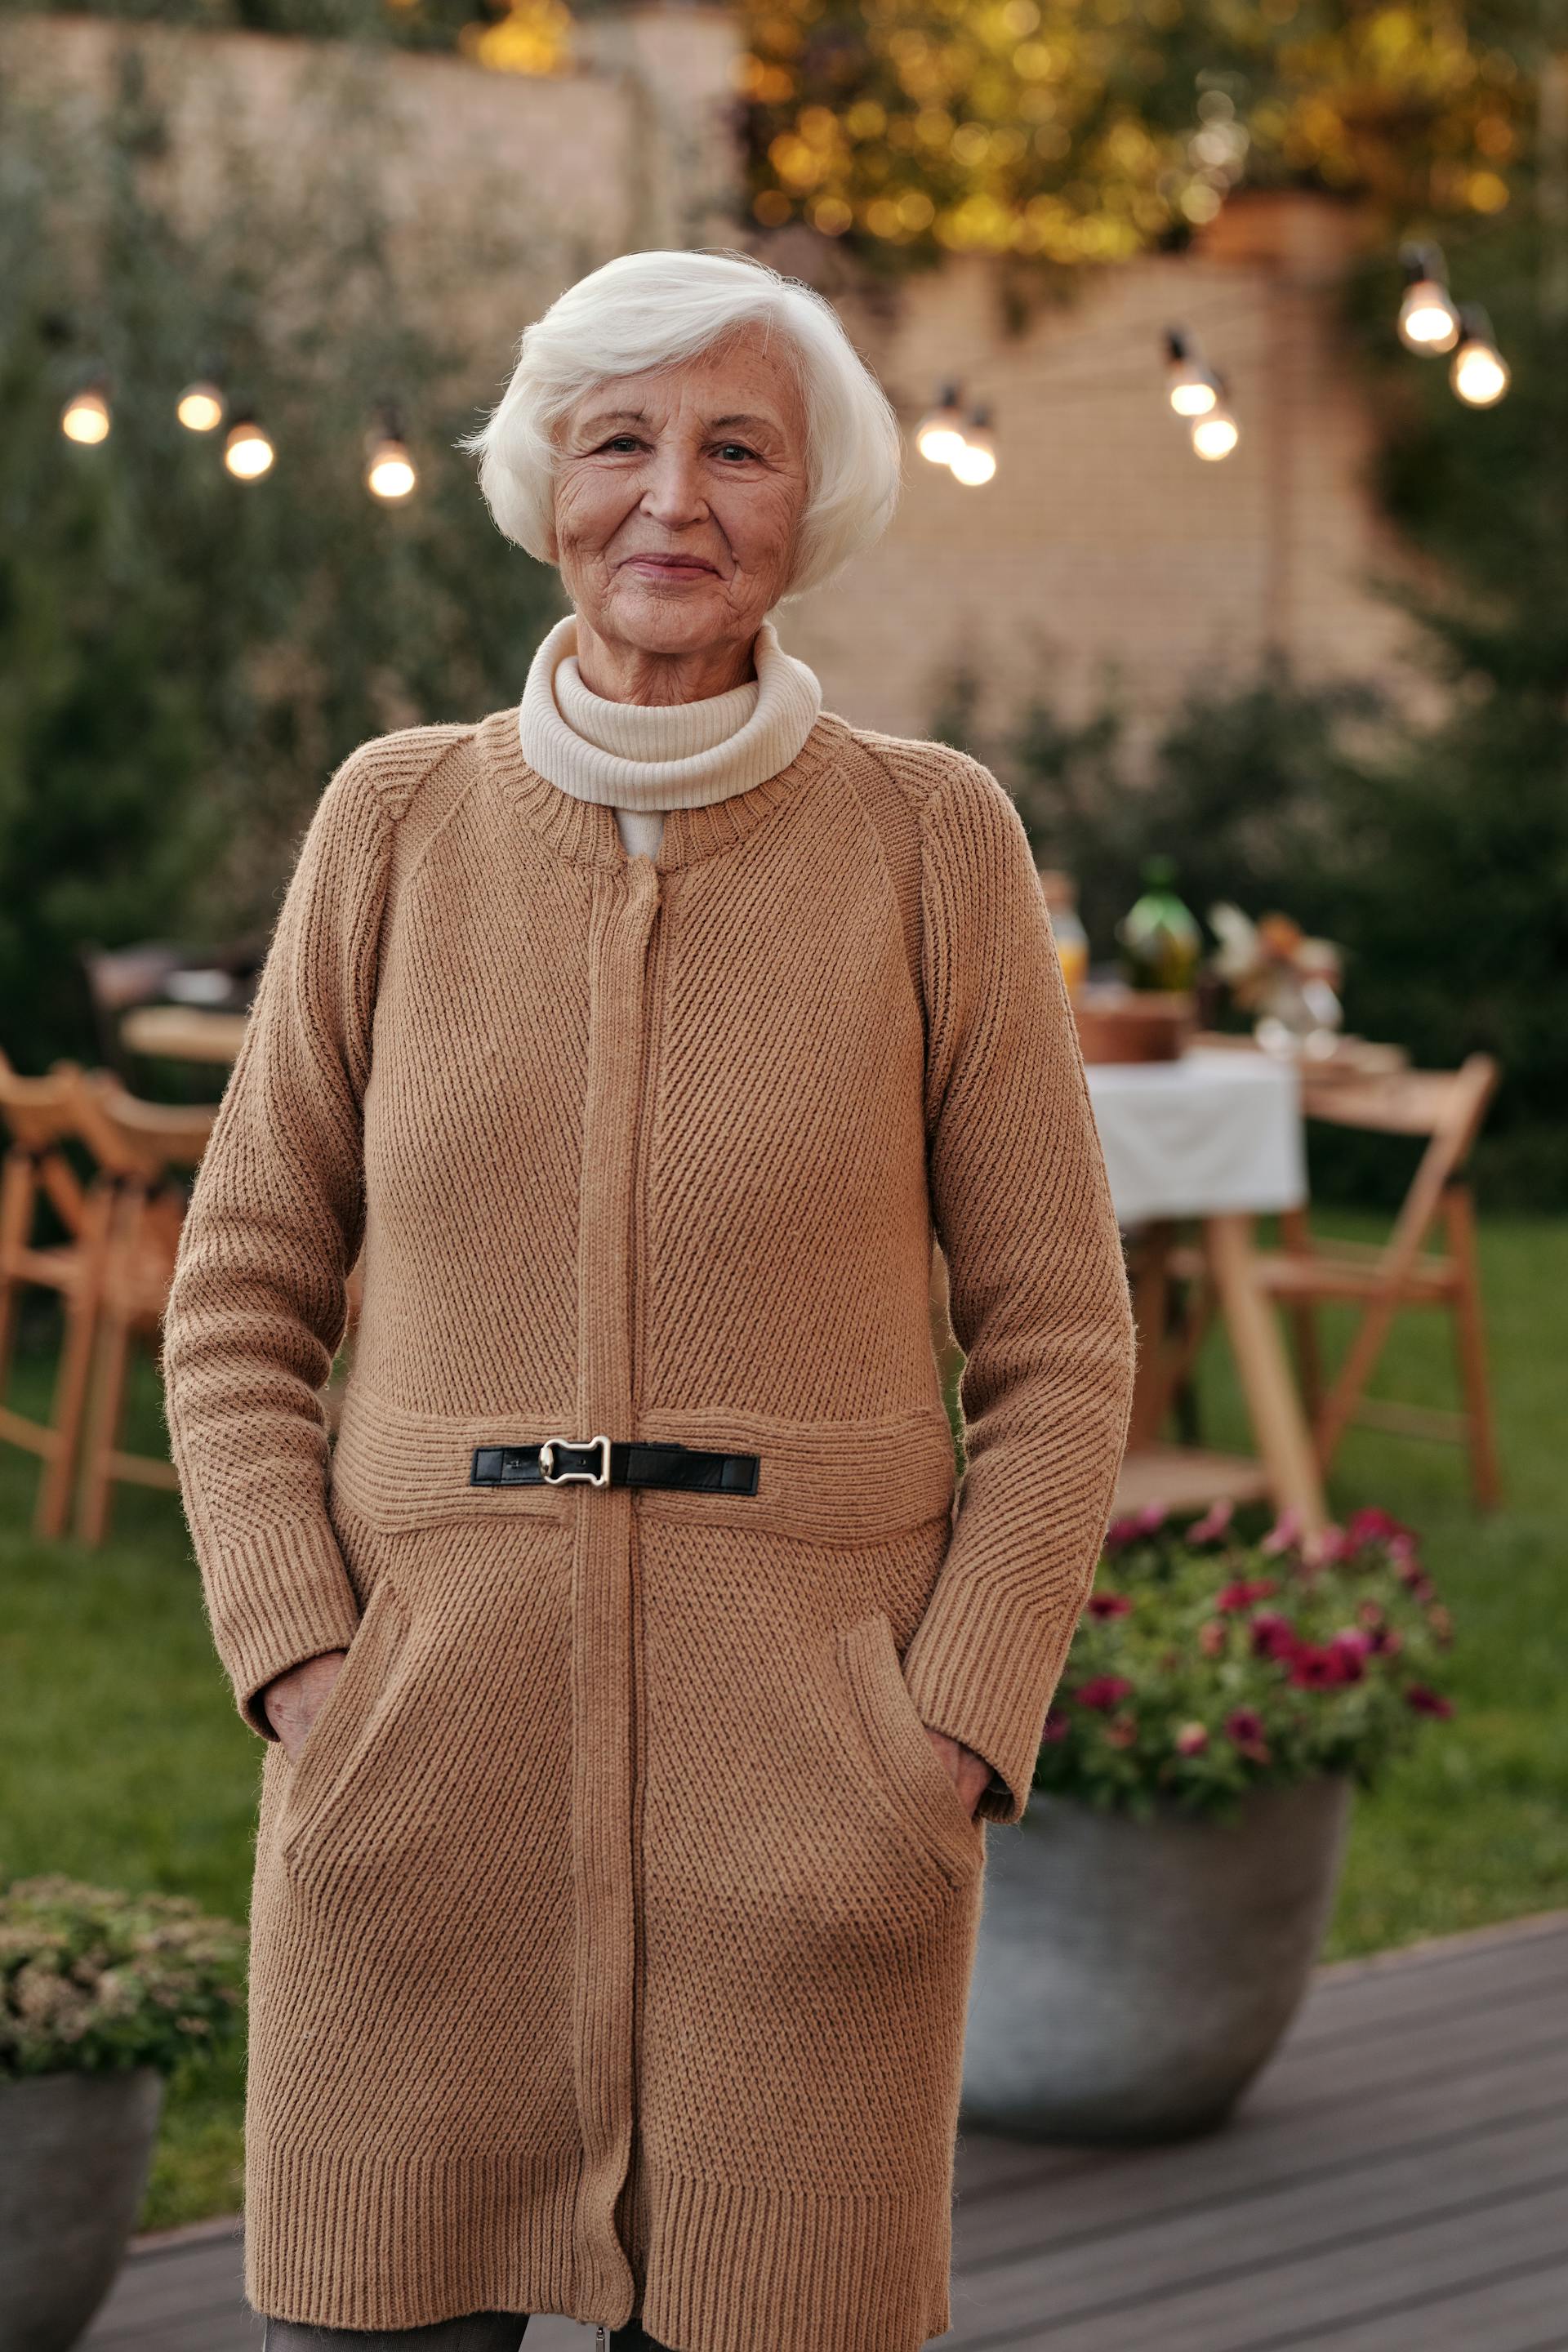 A smiling old woman wearing a coat | Source: Pexels